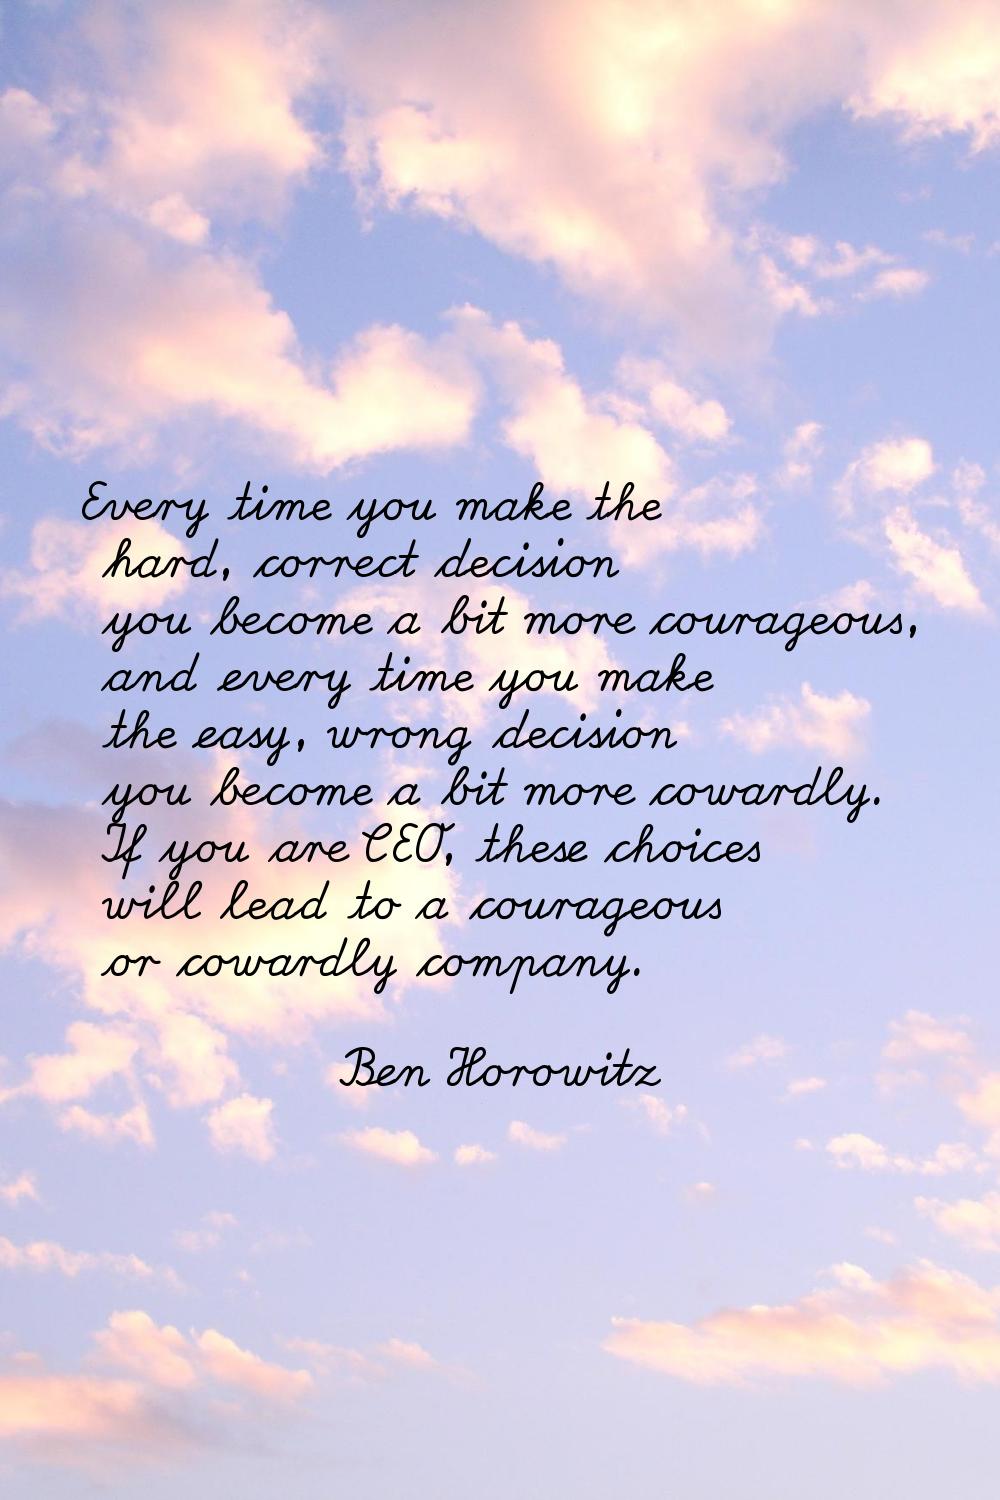 Every time you make the hard, correct decision you become a bit more courageous, and every time you